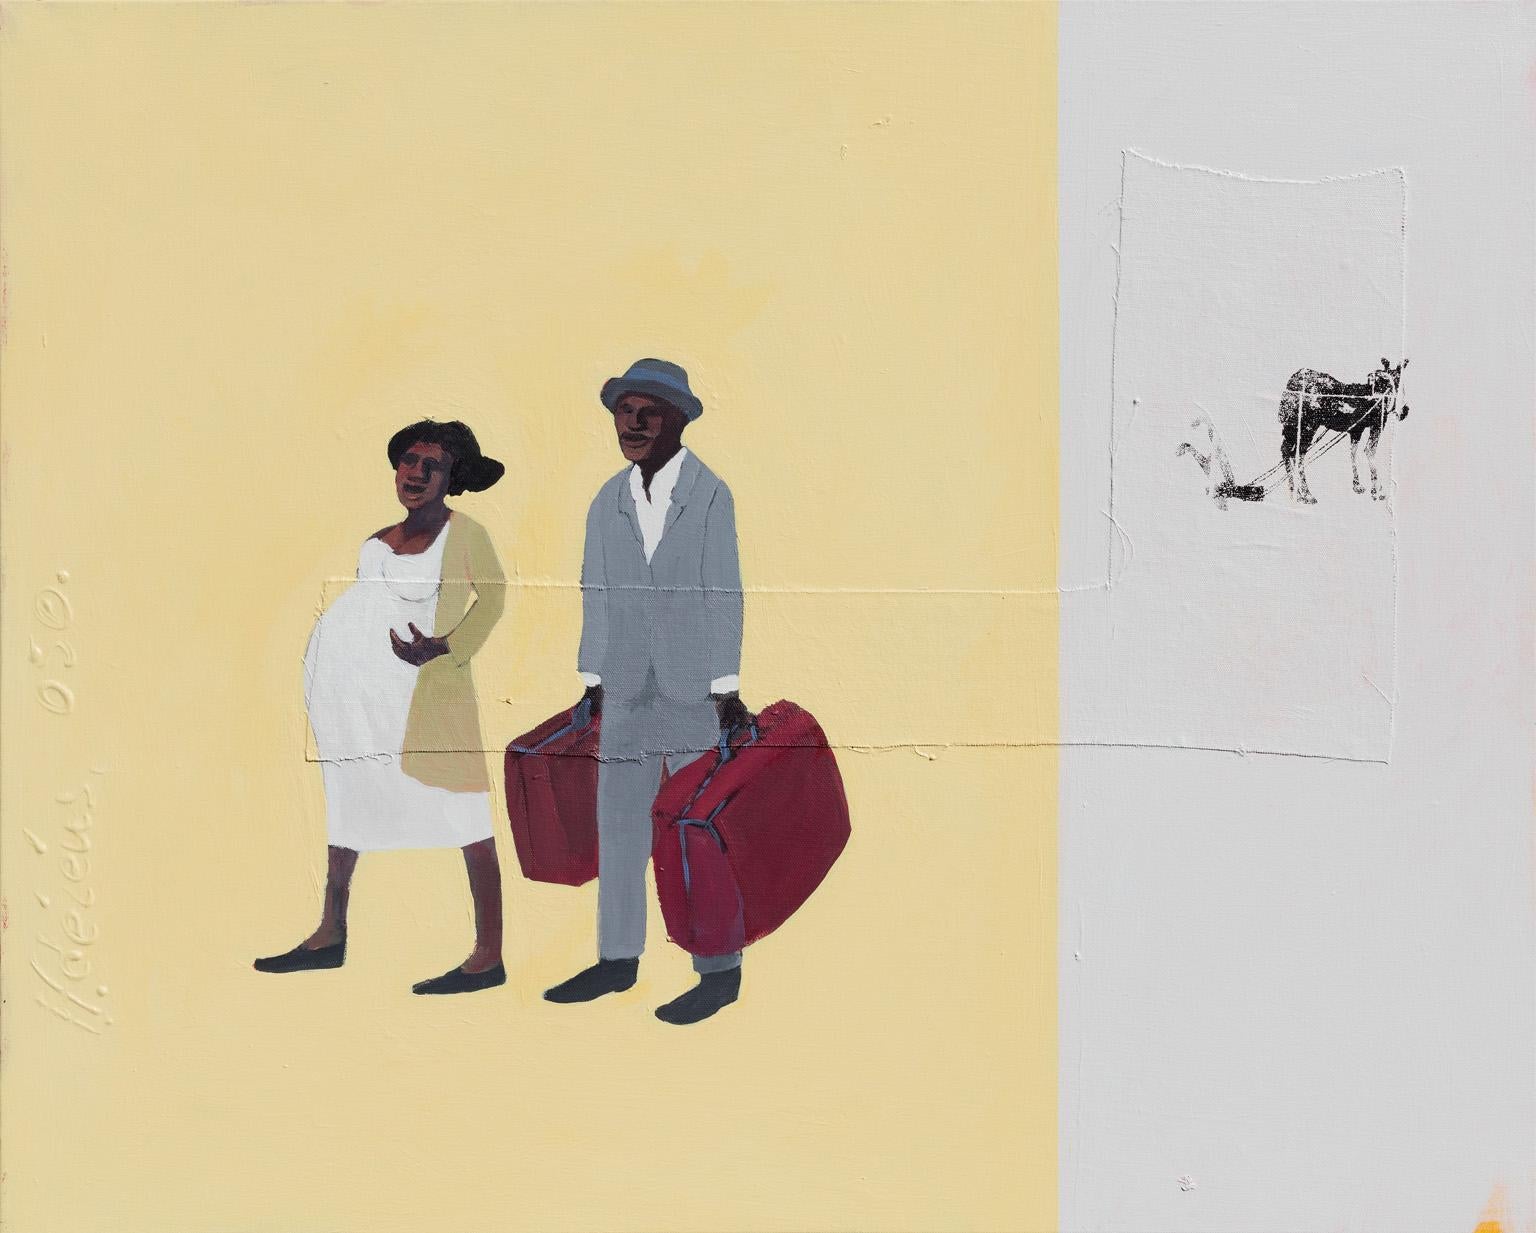 Francks Deceus's Journey #3 is a 24 x 30 inches mixed media work on canvas with collage. The work is partitioned in two distinct images. On the left side the artist depicted an African American couple standing against a yellow background. The woman